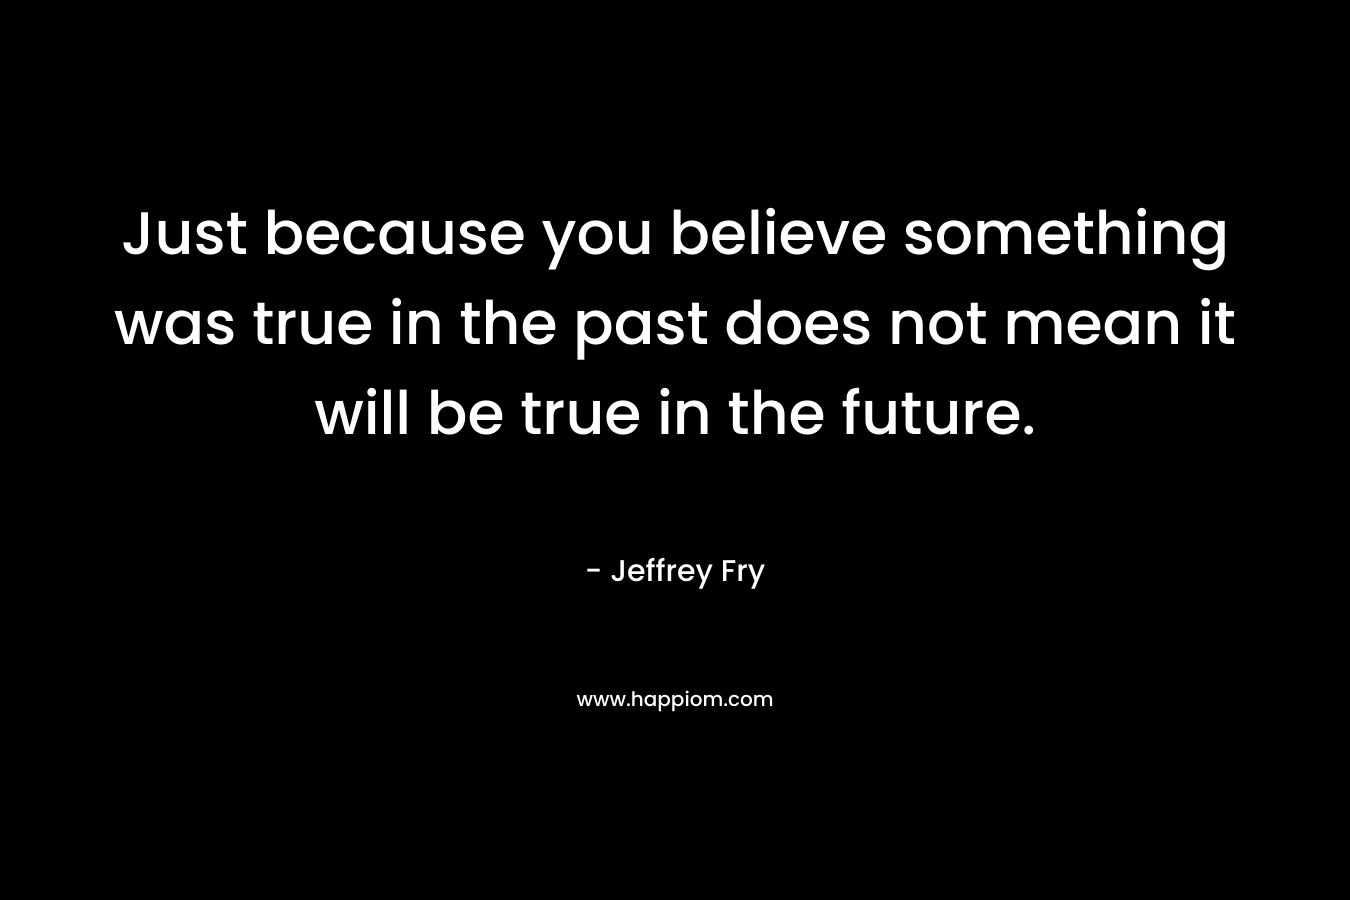 Just because you believe something was true in the past does not mean it will be true in the future.